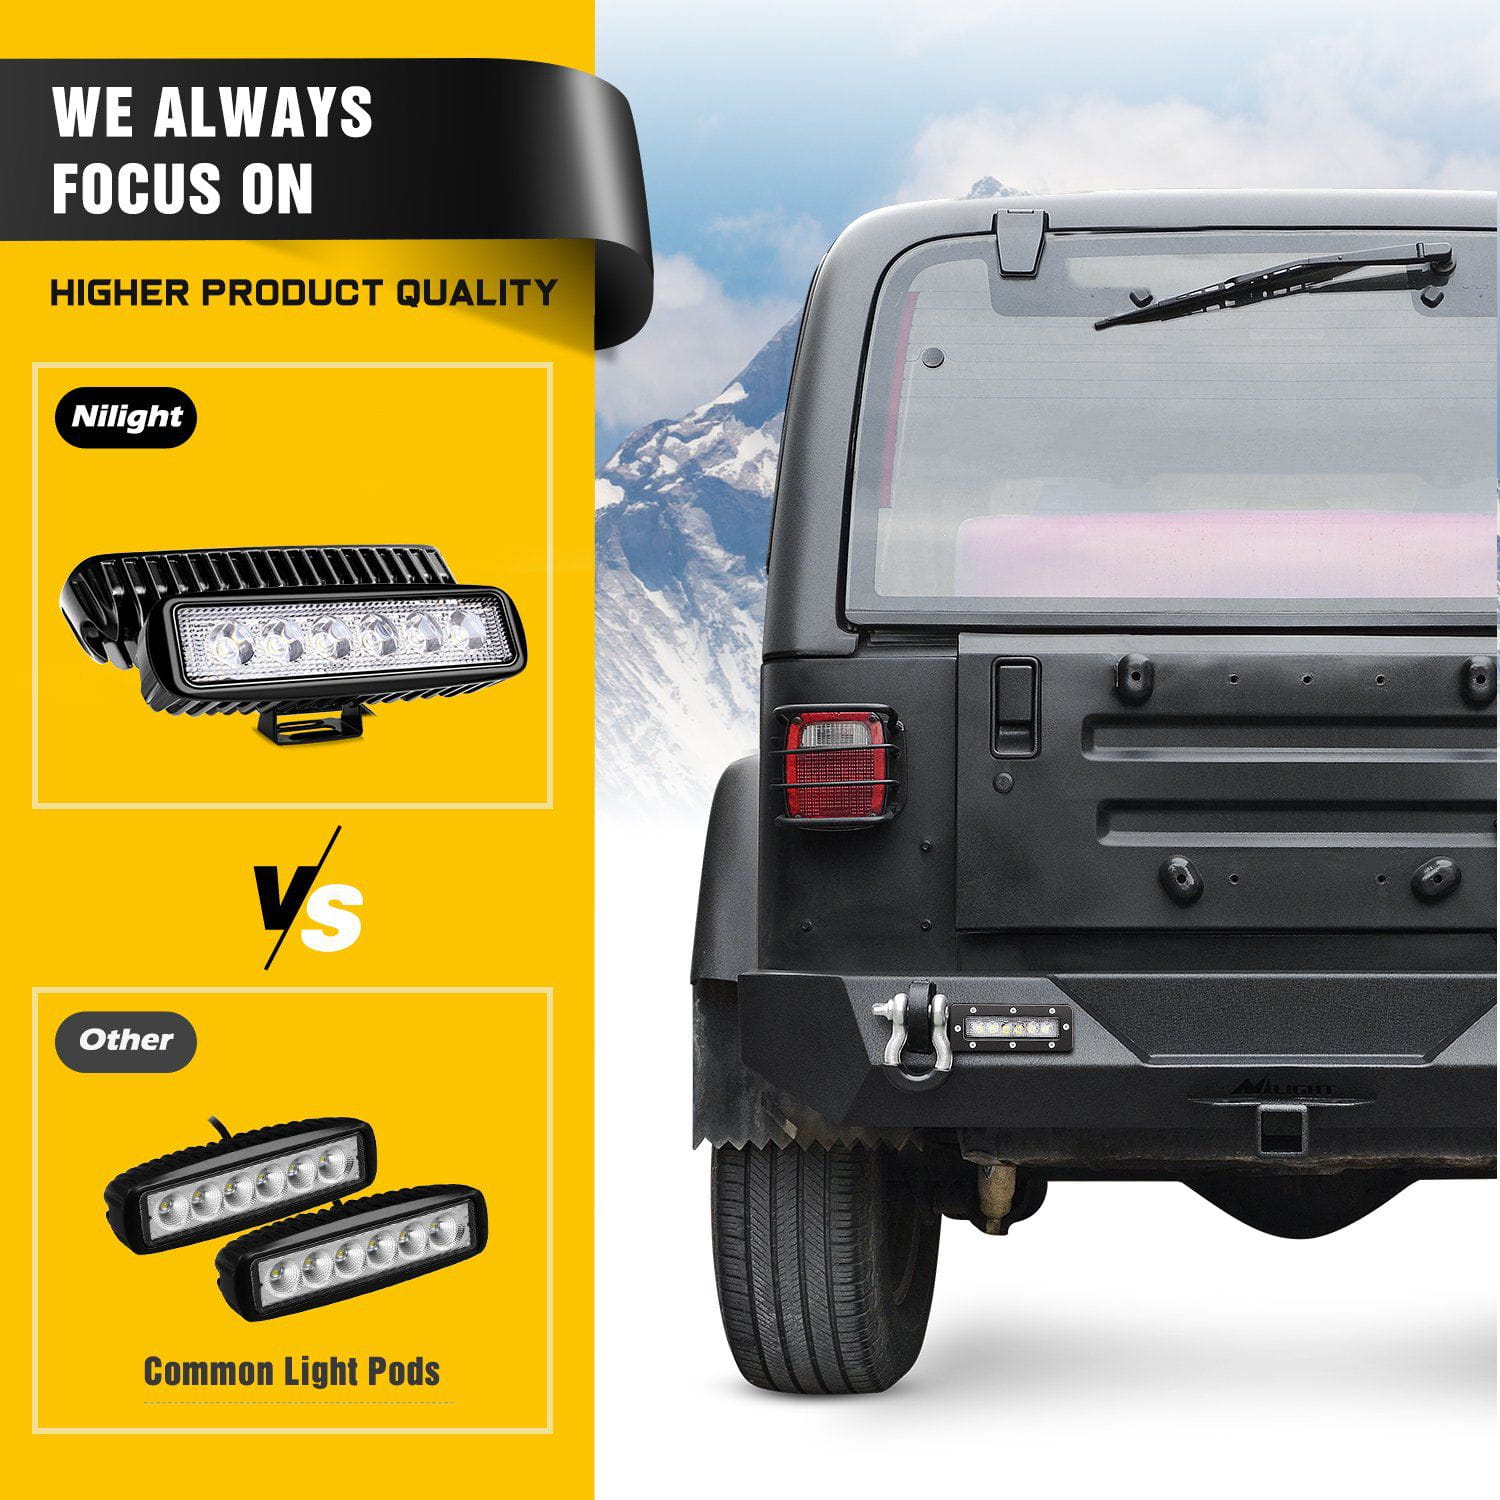 Higher Product Quality of Nilight Rear Bumper Kit for 1987-2006 Jeep Wrangler TJ & YJ